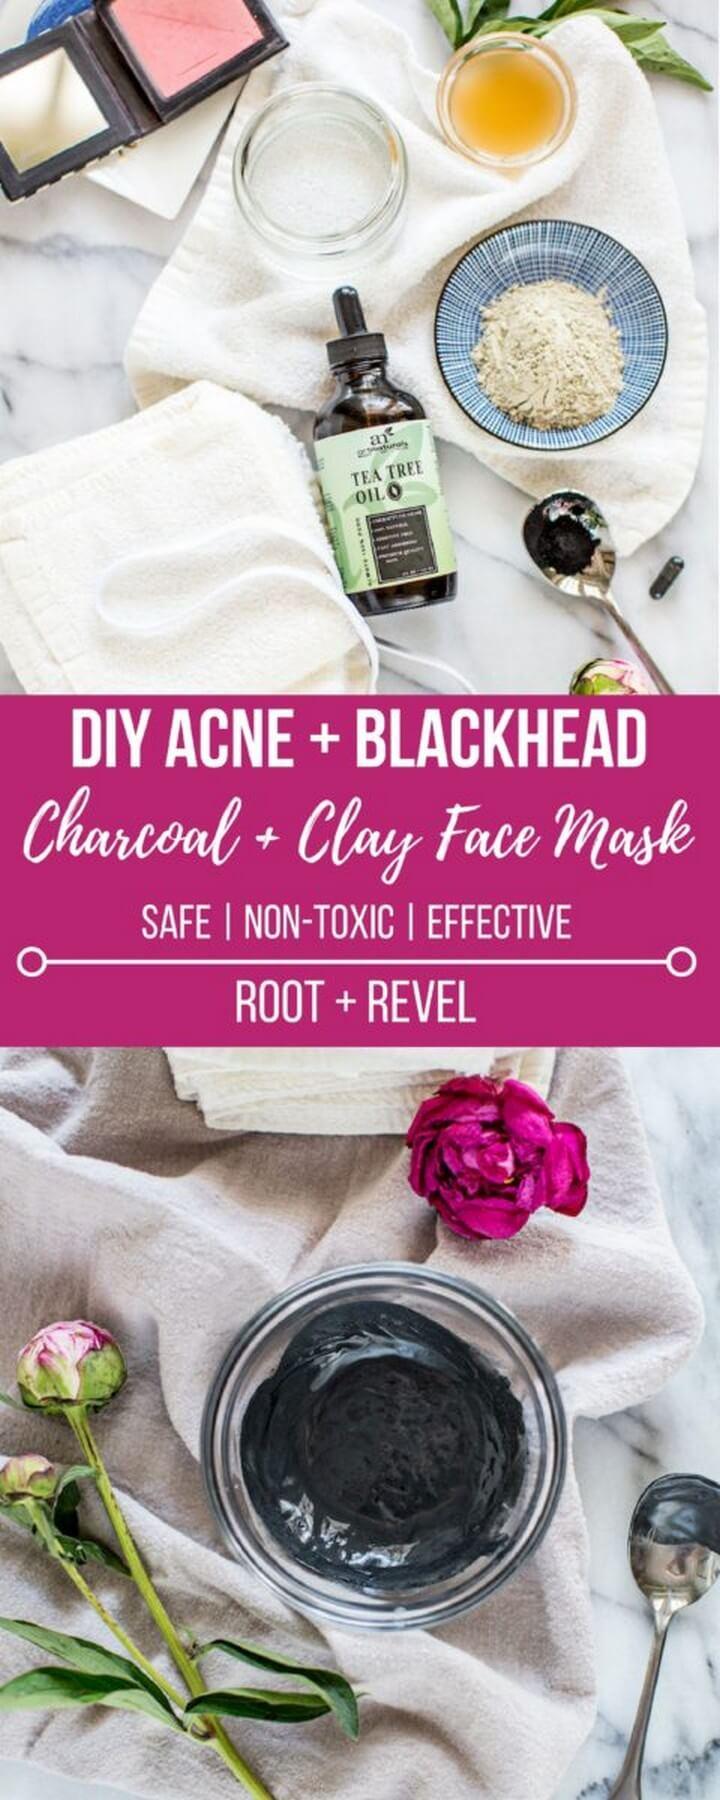 DIY Charcoal Clay Face Mask for Acne and Blackheads, diy face mask for acne, diy face mask for glowing skin, homemade face mask for dull skin, diy face mask for dry skin, diy face mask without honey, homemade face mask with honey, diy face mask for blackheads, diy face mask for oily skin, diy facial mask, diy facial mask for acne, diy facial masks for acne, diy facial peel off mask, diy facial mask for dry skin, diy facial mask for blackheads, diy facial mask for glowing skin, diy facial mask for oily skin, best diy facial mask, diy facial mask for acne scars, recipe for homemade facial mask, diy facial exfoliating mask, diy green tea facial mask, diy facial peel mask, diy facial mask recipes, diy facial mask for redness, diy facial mask for pores, diy facial mask for combination skin, diy facial mask sheet, diy deep cleansing facial mask, compressed diy facial mask, turmeric facial mask diy, diy facial hair removal mask naturally & permanently at home, compressed diy facial mask forever 21, diy facial mask for wrinkles, diy facial mask for dark spots, diy facial hair removal peel off mask, diy facial hair removal mask, diy facial mask for pimples, which homemade facial mask is the best, diy facial mask gift, best diy facial mask for blackheads, diy facial mask without honey, diy facial mask acne scars, diy facial mask to brighten skin, diy facial mask honey, diy facial mask pinterest, diy facial mask for breakouts, vegan facial mask diy, diy facial mask with lemon, diy facial mask for rosacea, diy facial paper mask, diy facial mask kit, diy face mask to remove facial hair, diy facial mask scrub for oily acne prone skin, diy facial mask sensitive skin, diy facial mask mixing bowl, diy facial mask dry skin, diy facial mask ingredients, diy facial collagen mask, diy facial steam mask, diy essential oil facial mask, diy facial mask at home, how to diy facial mask, diy facial mask with honey, diy facial masks that work, diy face mask using masks, diy facial mask with oatmeal, diy facial mask avocado, diy for facial mask, diy facial mask natural, diy facial mask how to make, diy facial moisturizing mask, diy facial mask for acne prone skin, best diy facial mask for acne, diy facial mask hydrating, yogurt facial mask diy, diy facial mask with baking soda, how to make diy facial mask, glowing facial mask diy, diy egg white facial mask, diy facial mask for eczema, recipe for facial mask, diy facial mask glowing skin, facial diy mask bowl, diy facial mask for dark circles, diy face mask for facial hair, turmeric diy facial mask, diy facial mask with clay, diy banana facial mask, diy enzyme facial mask, diy facial mask with coconut oil, diy tomato facial mask, diy daily facial mask, diy facial mask for sensitive skin, diy organic facial mask, diy rose facial mask, recipe for facial mask with avocado, diy facial paper compress mask, diy detox facial mask, diy facial cloth mask, how to diy a face mask, diy facial tightening mask, diy pumpkin facial mask, homemade diy facial mask, diy facial clay mask, diy rice facial mask, fun and easy diy facial mask, the best diy facial mask, diy facial mask for whiteheads, diy egg facial mask, diy overnight facial mask, diy gold facial mask, diy facial mask for aging skin, diy facial mask for pigmentation, diy jelly facial mask, diy facial mask for scars, diy oxygen facial mask, diy papaya facial mask, diy face mask to remove unwanted facial hair, diy aloe facial mask, matcha facial mask diy, diy facial mask for hair removal, diy aloe vera facial mask, diy facial mask for mature skin, diy facial mask for tired skin, diy facial mask with activated charcoal, diy facial mask easy, diy facial mask for clogged pores, diy peel off facial mask aloe vera, facial mask treatment diy, korean facial mask diy, mumuso diy facial mask tool set, diytomake.com,